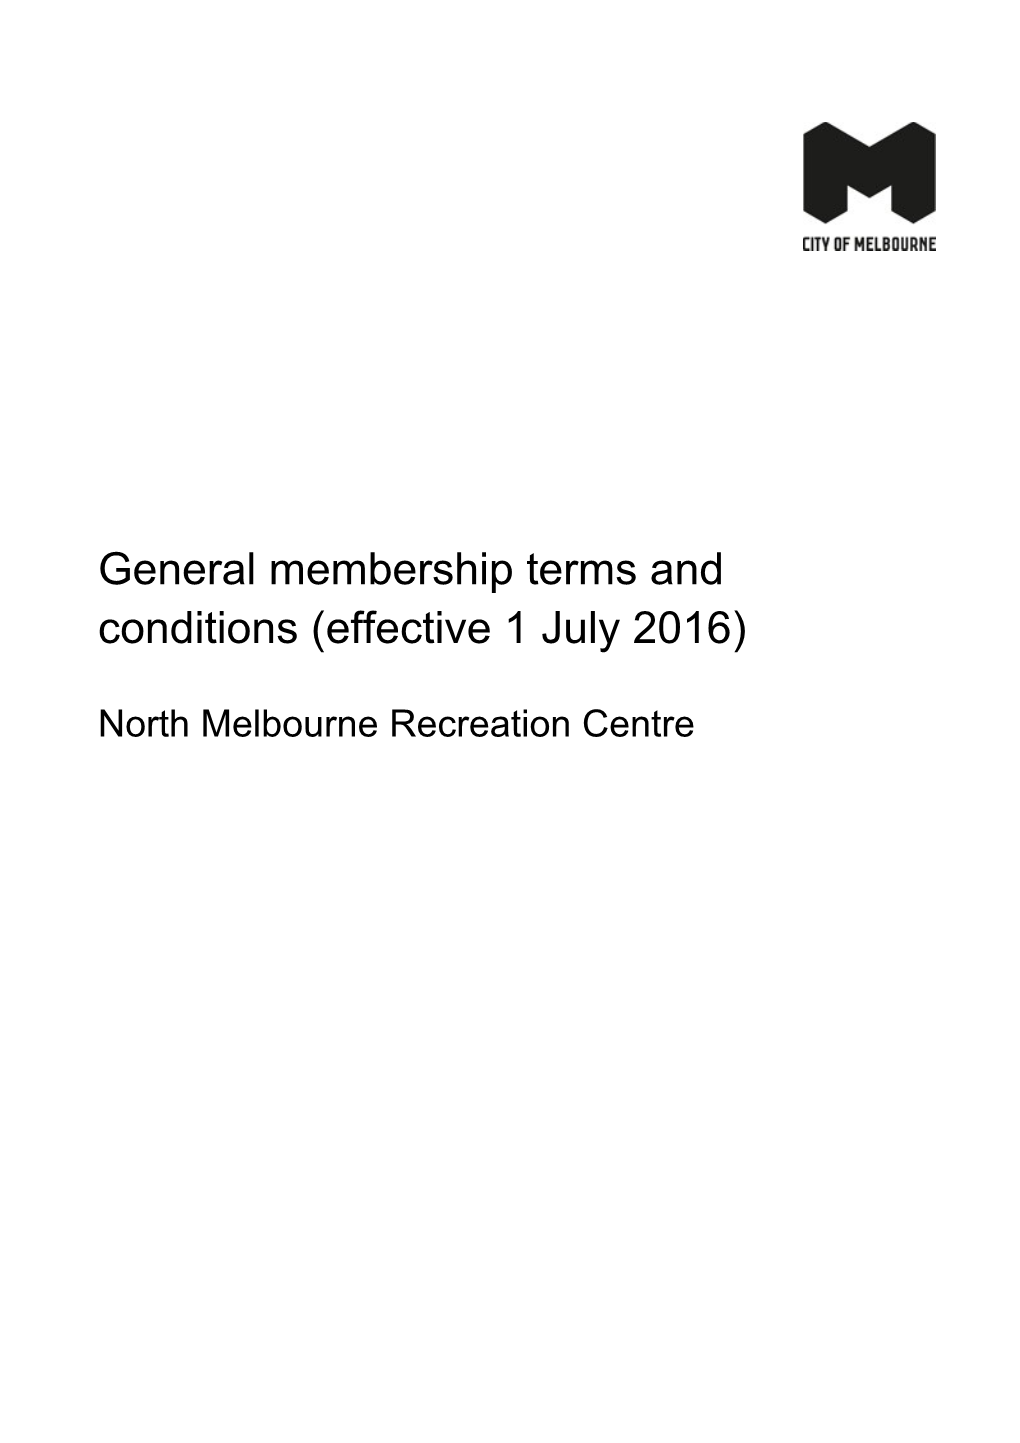 NMRC General Membership Terms and Conditions